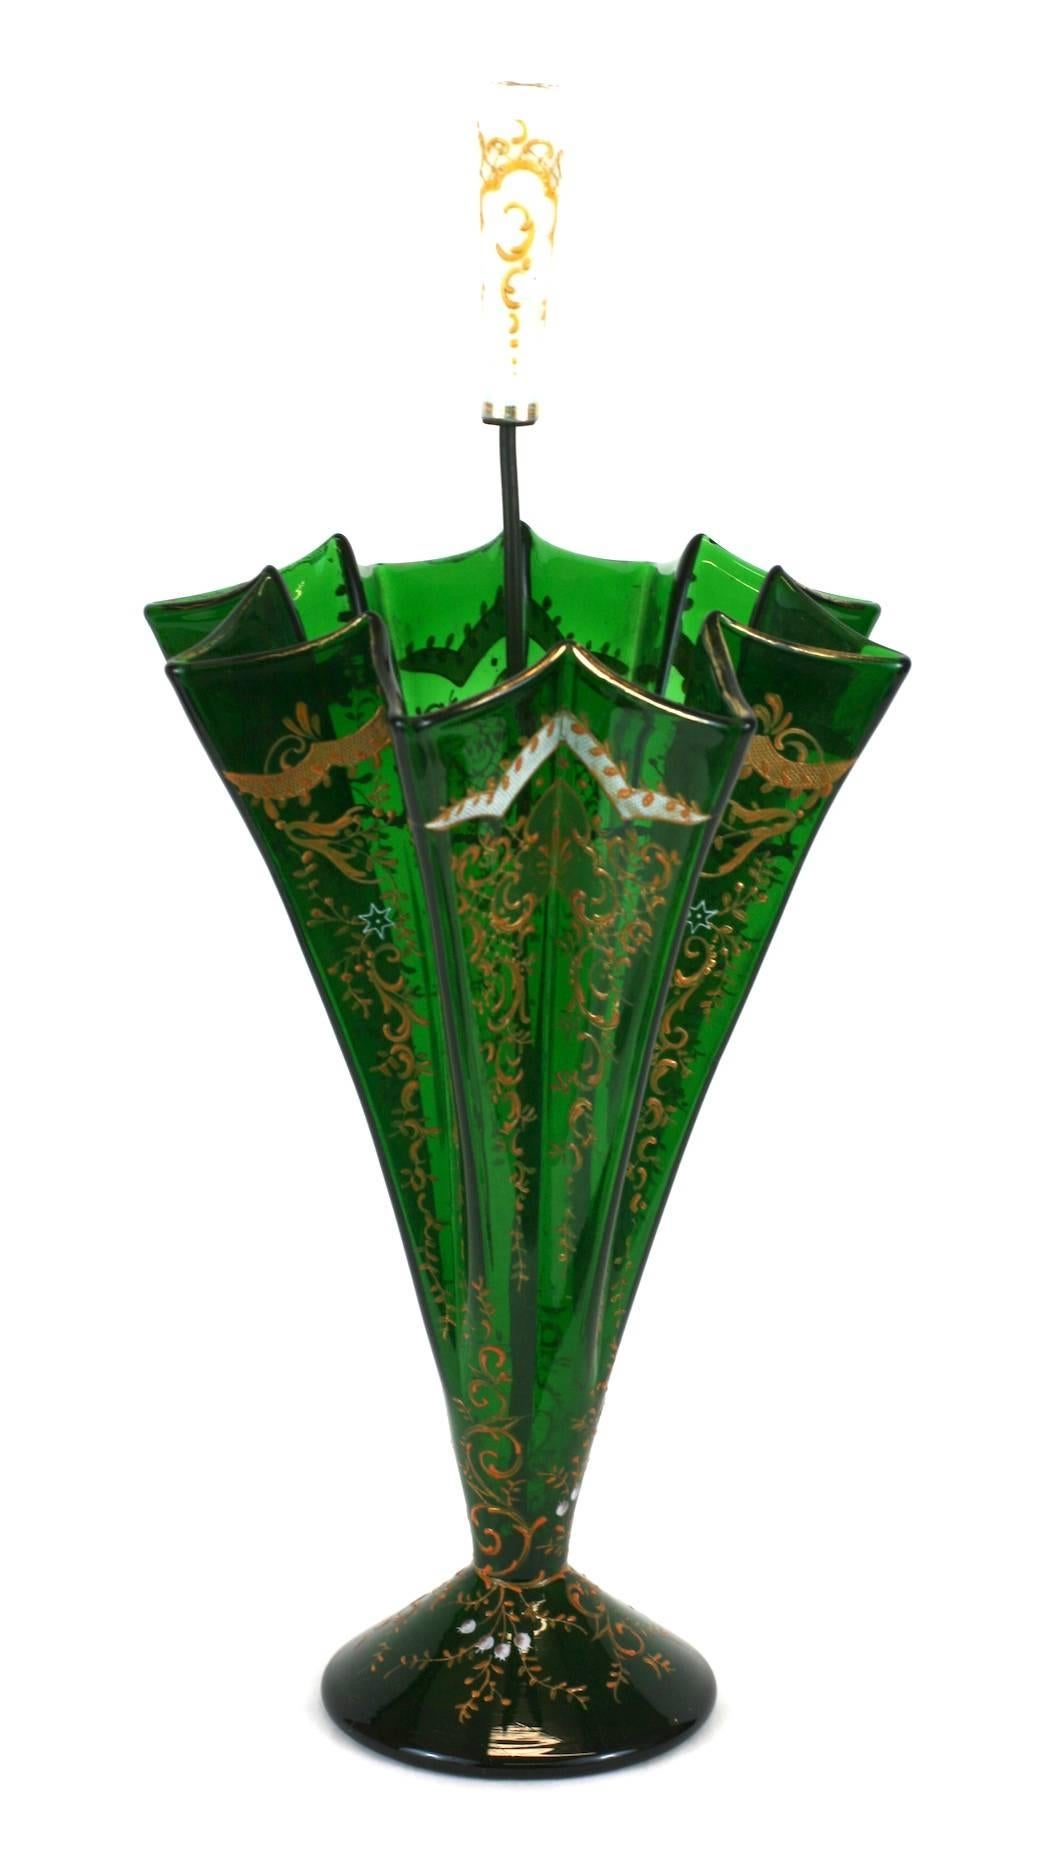 Charming and unusual Victorian glass umbrella vase with hand enameled raised gold and white decoration. Deep green glass with enamel decoration, repeated on the milk glass handle. Interior wire work system hold flowers in place while supporting